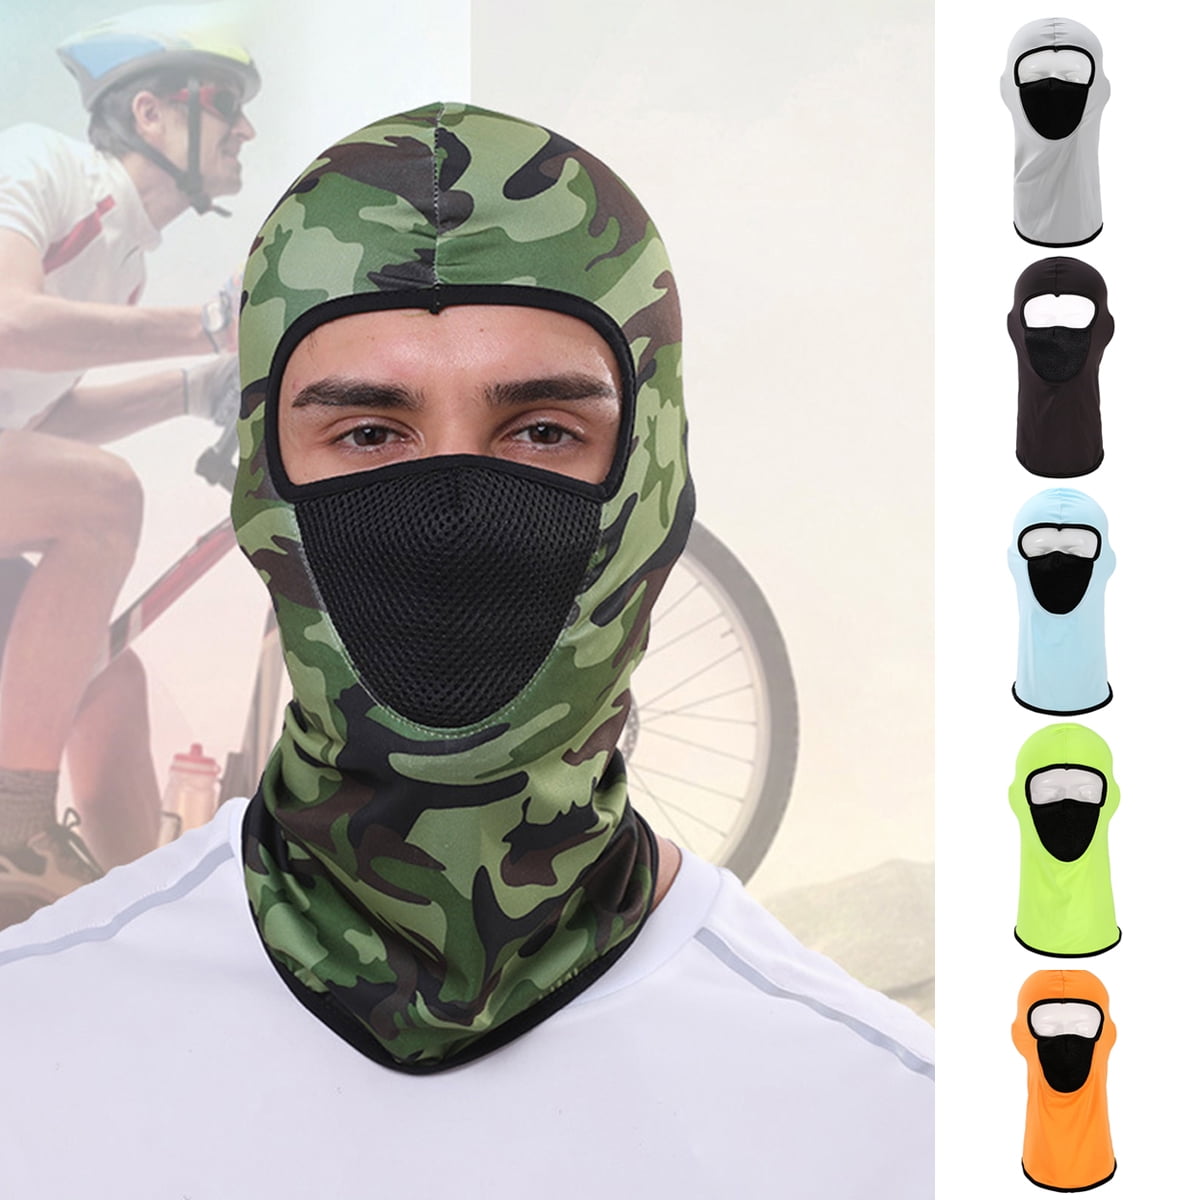 Breathable Anti-UV Military Face Mask Army Combat Mask Balaclava Cover Protect